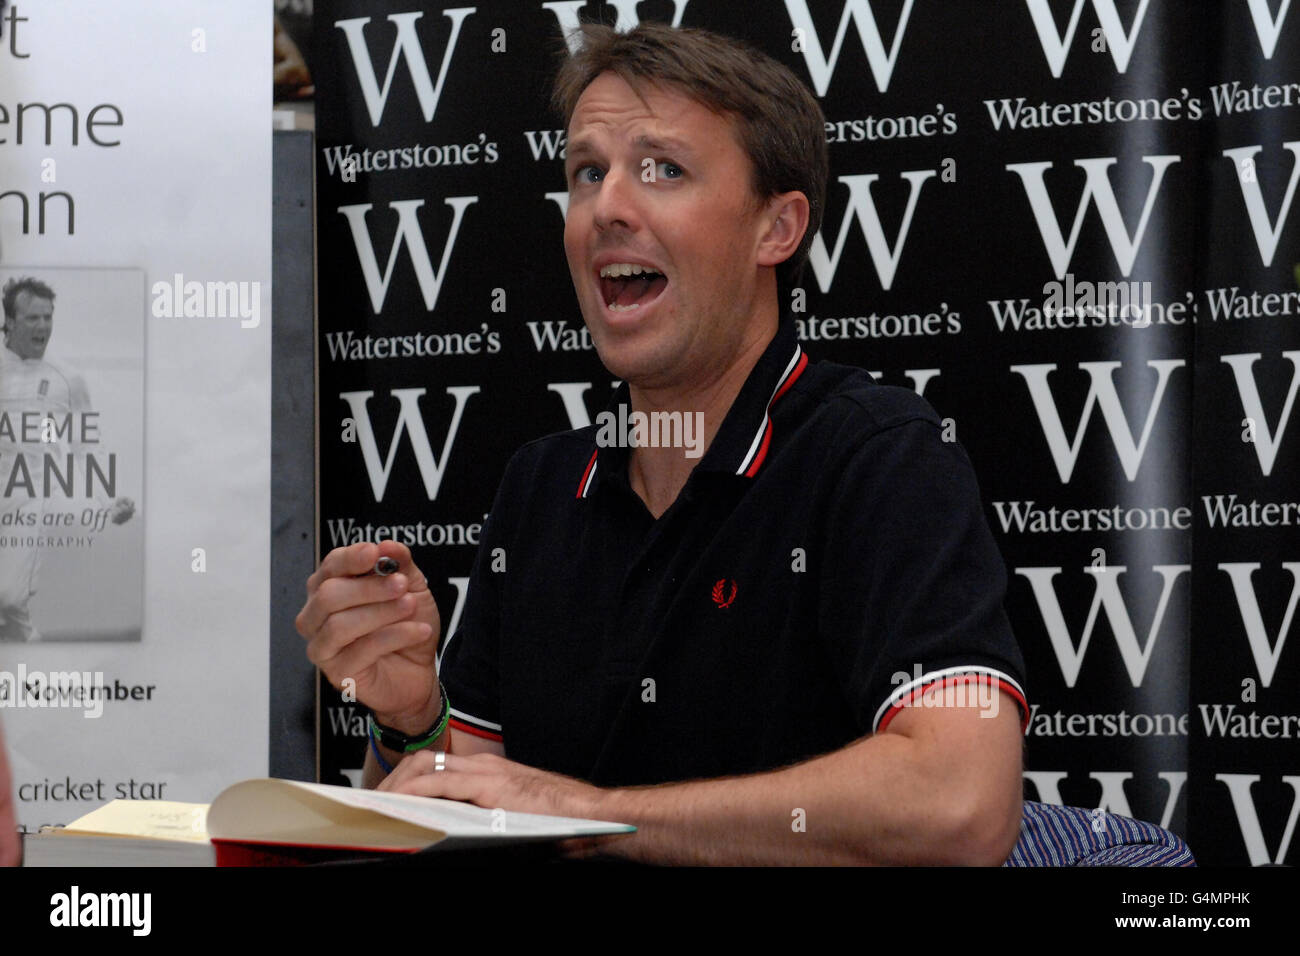 Cricket - Graeme Swann Book Signing - Waterstones Nottingham. Inghilterra Cricketer Graeme Swann firma copie del suo nuovo libro The Breaks are Off at Waterstones, Nottingham. Foto Stock